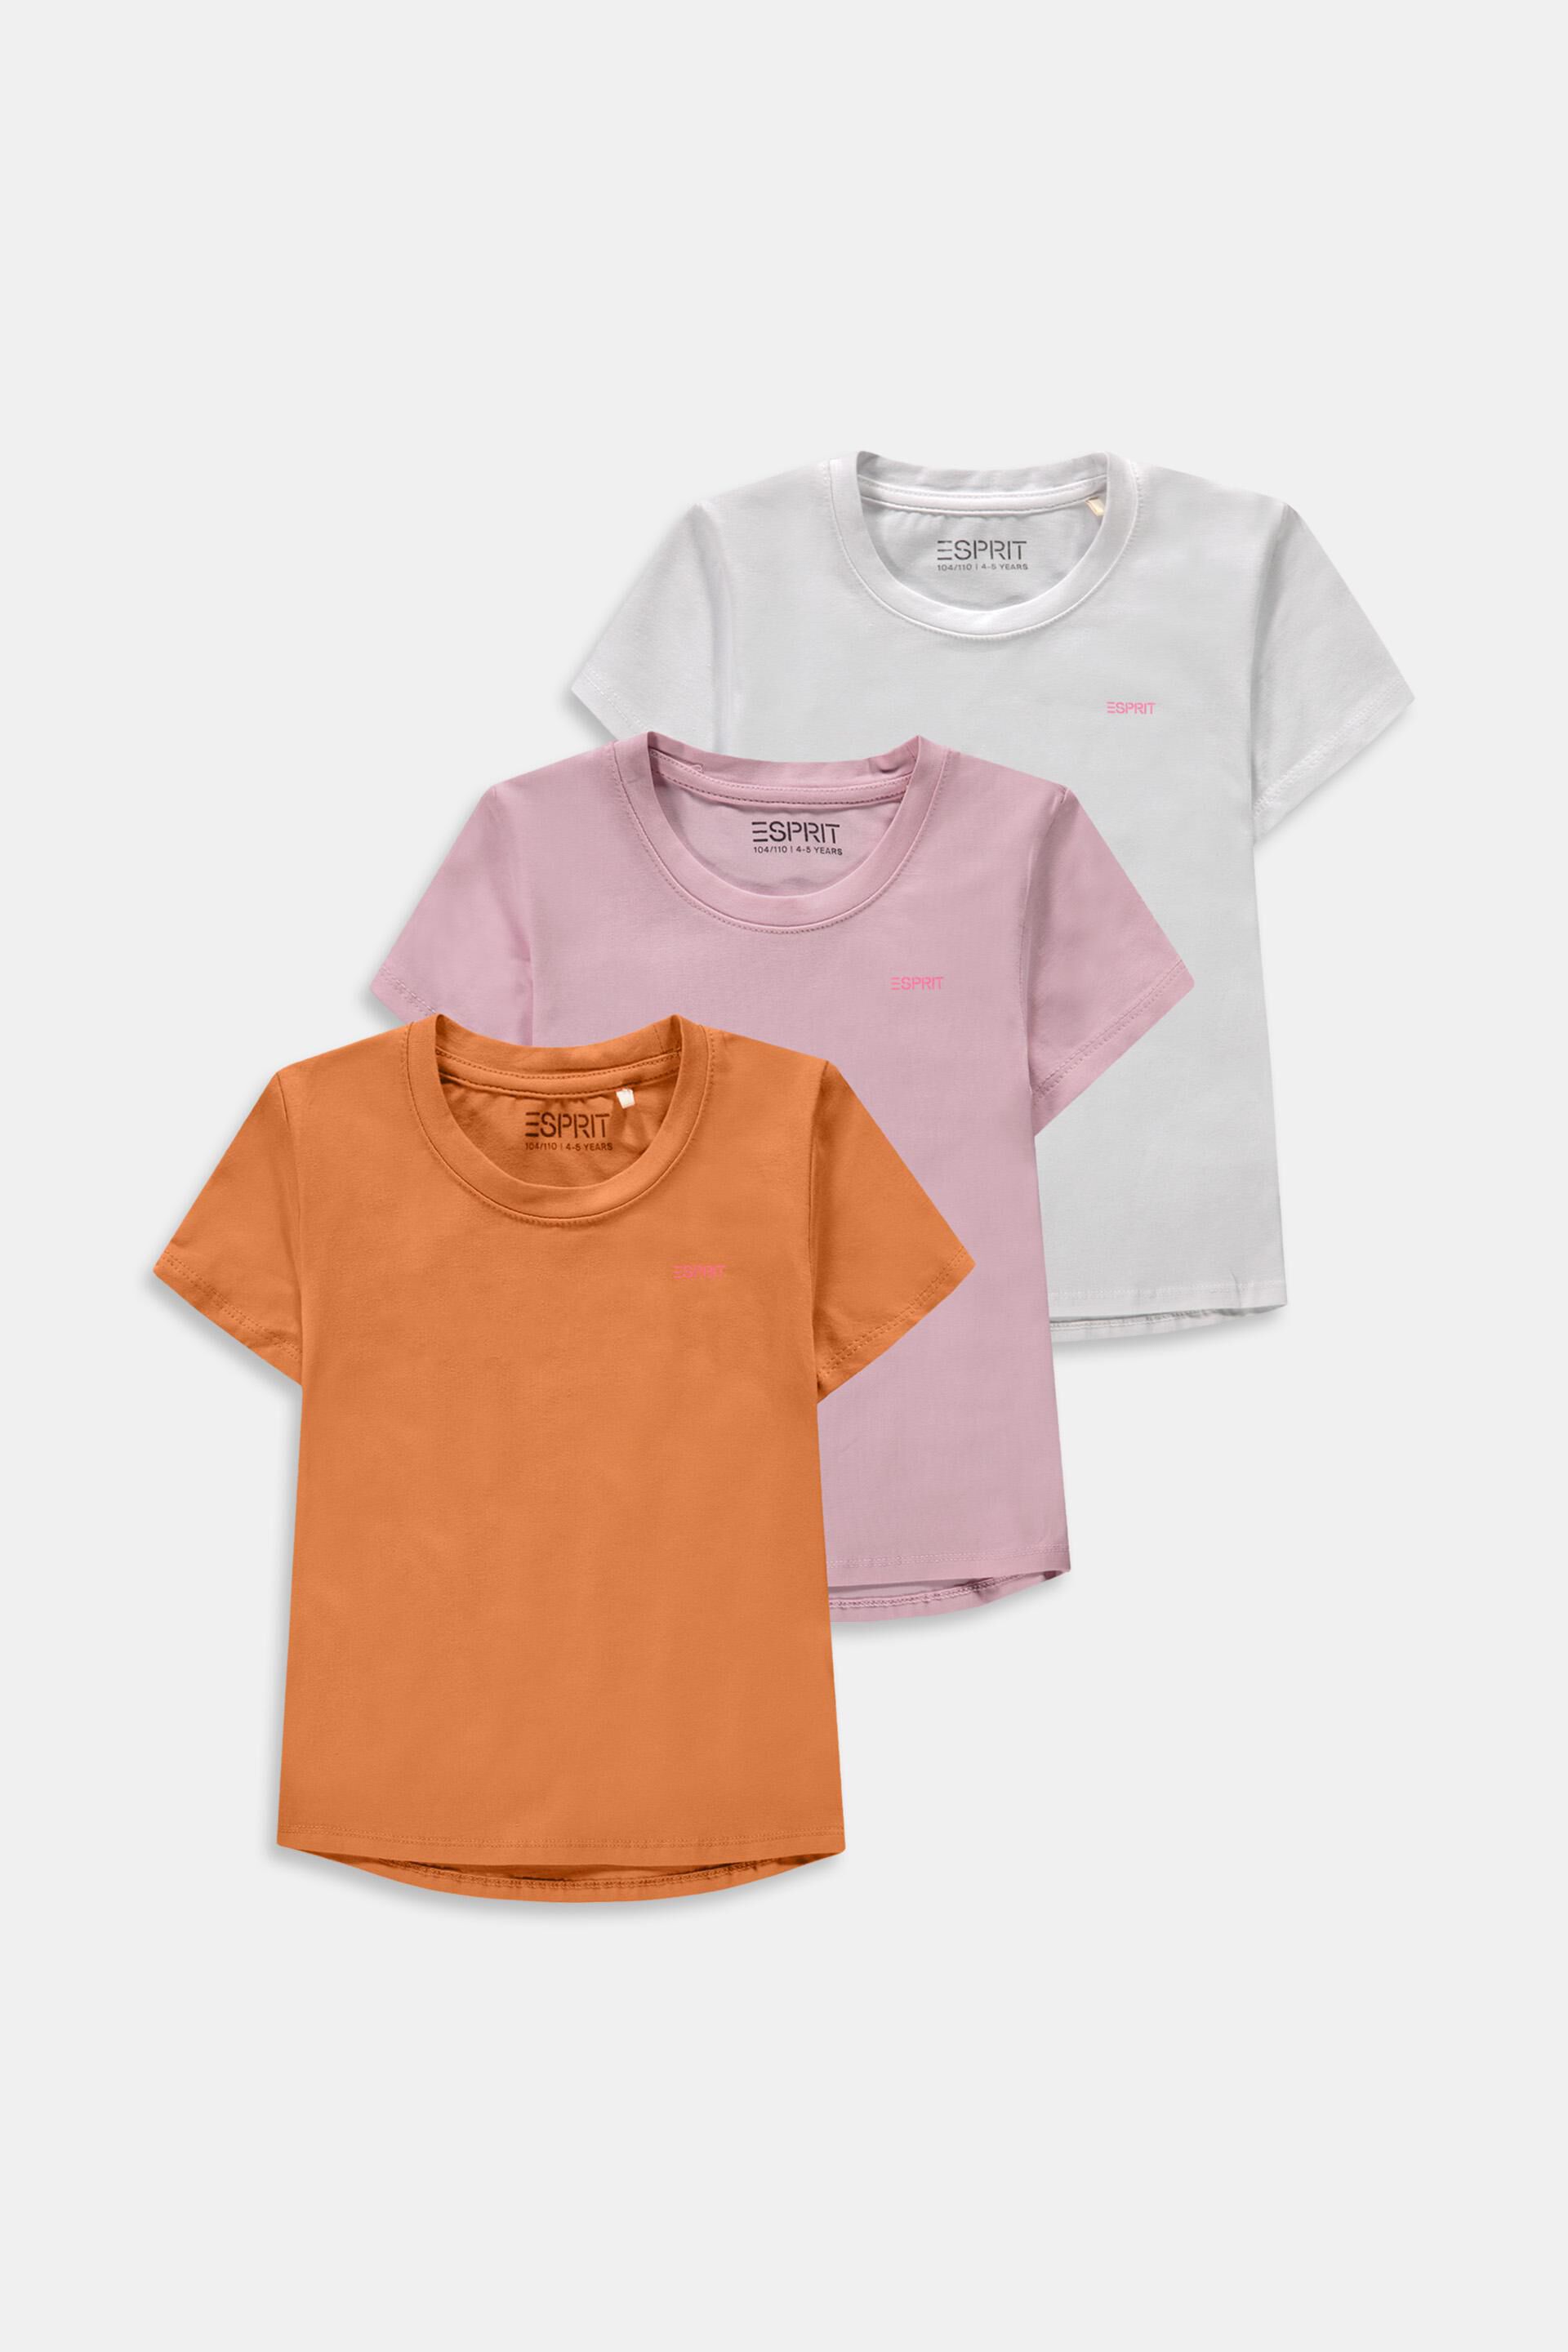 Esprit Outlet 3-pack of small logo print t-shirts